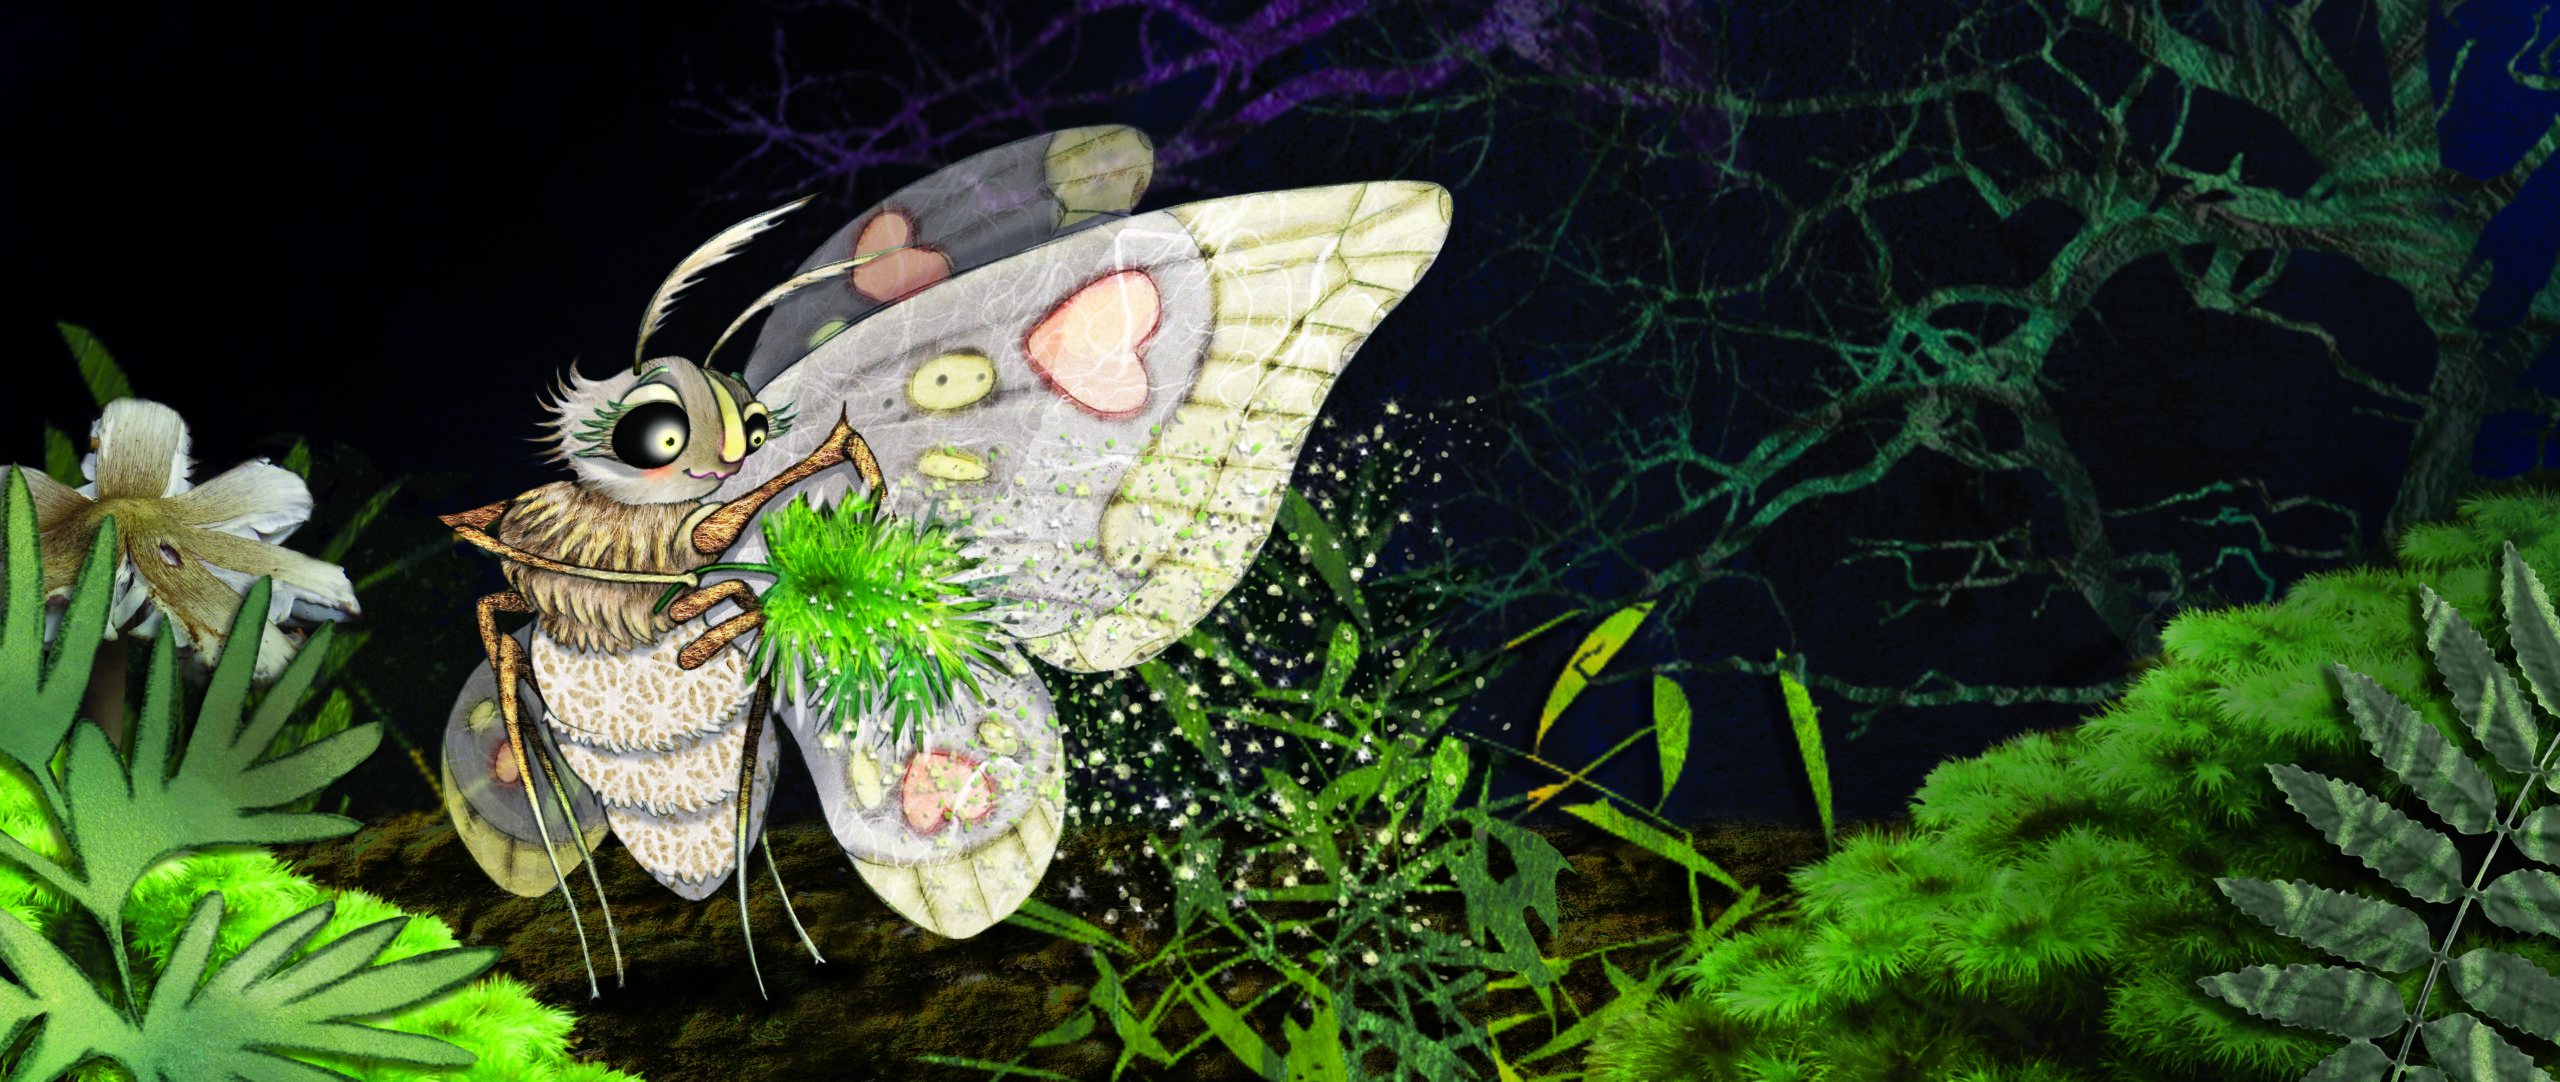 Illustration of a butterfly from the children book "Far, far from home".